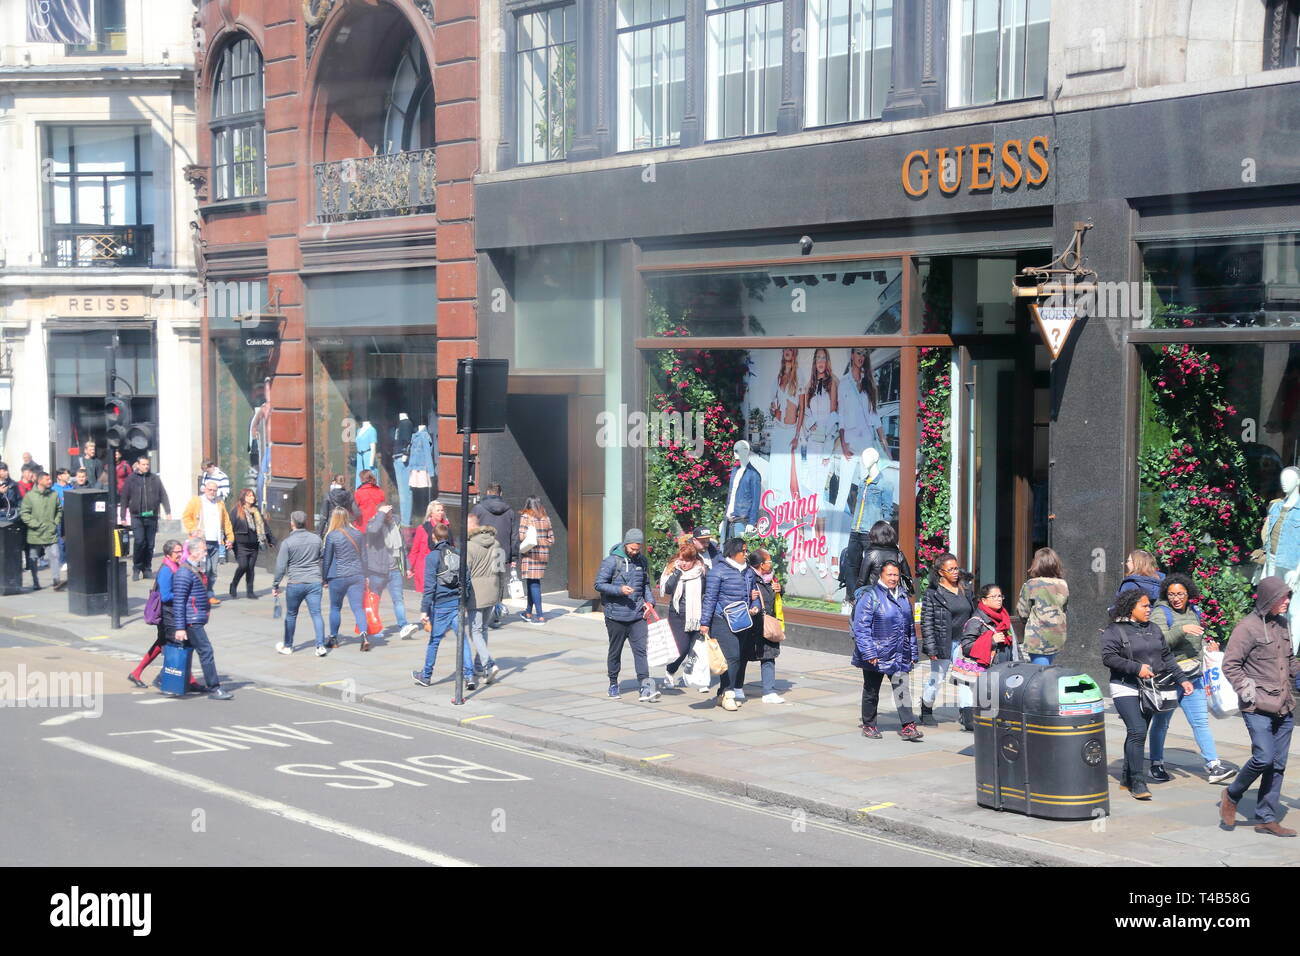 Guess Store Shop Uk High Resolution Stock Photography and Images - Alamy